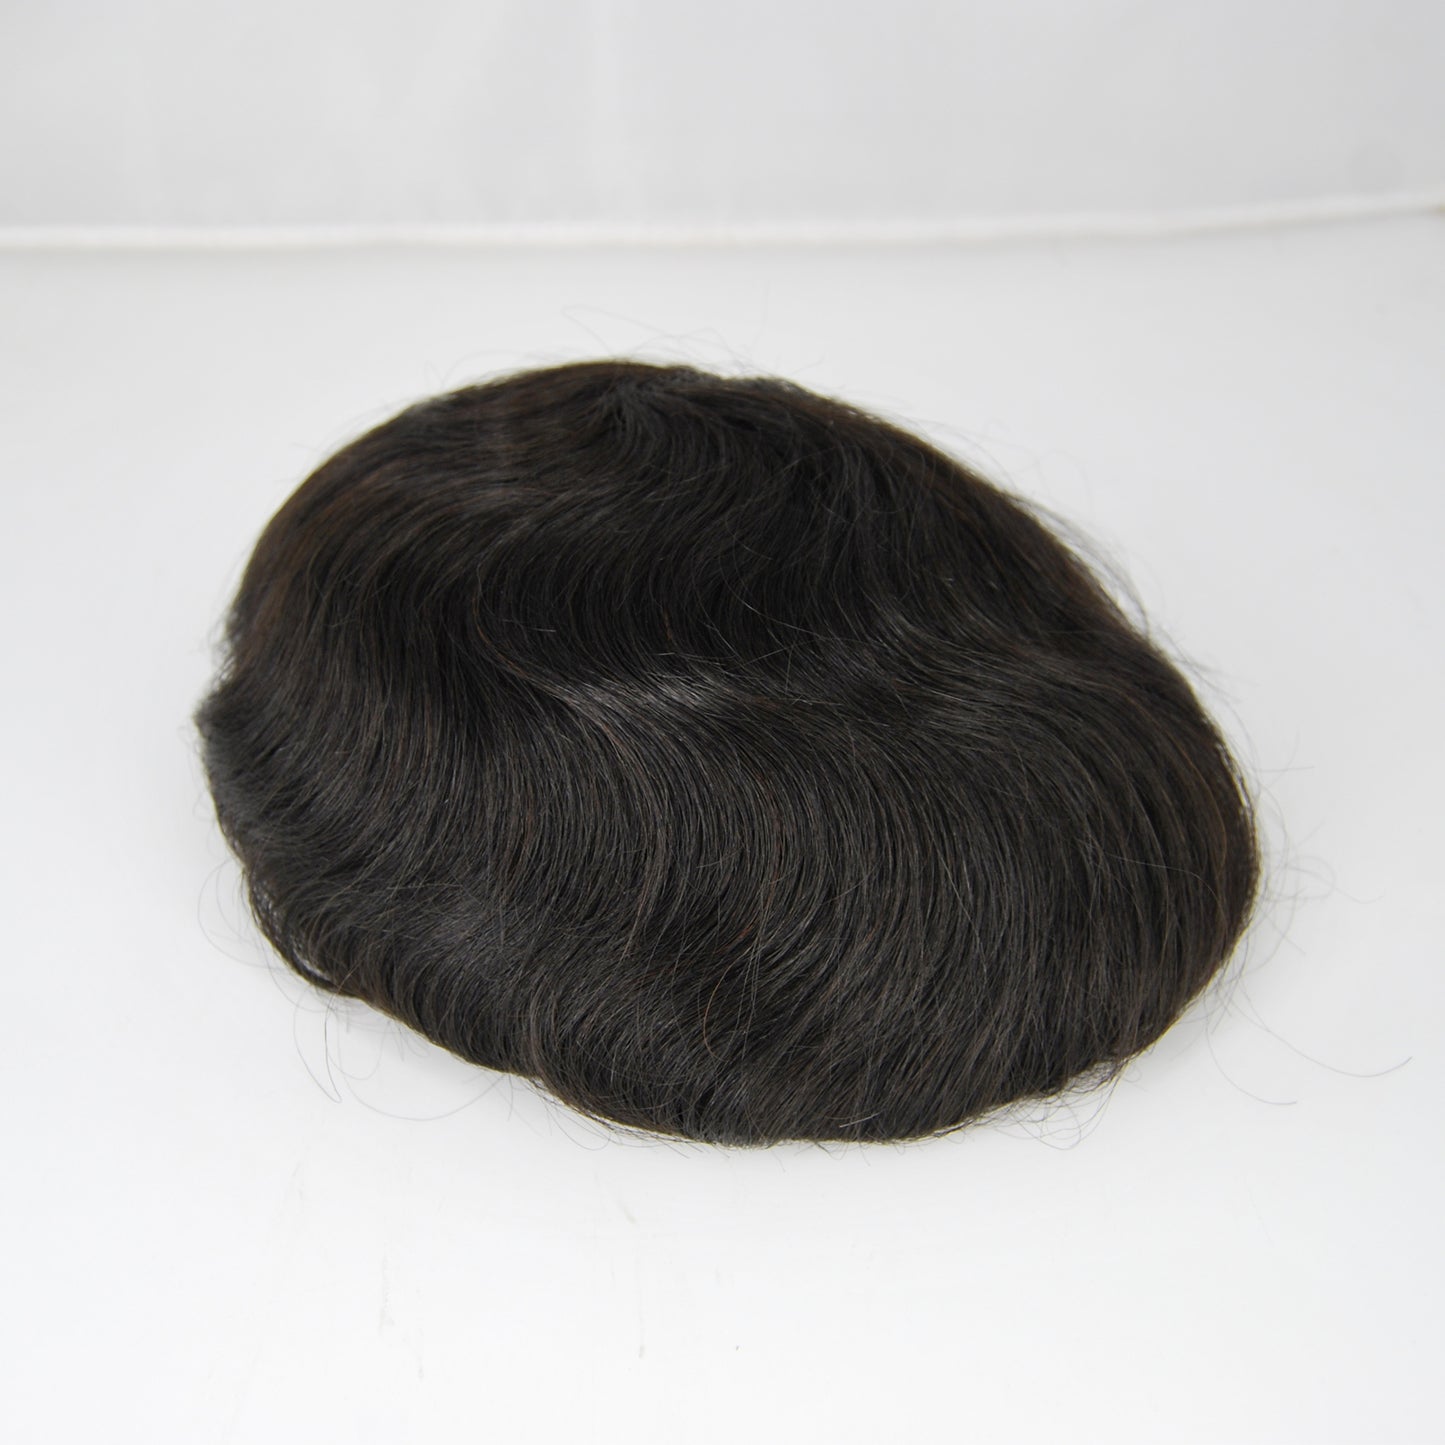 Clearance 9x7 full lace toupee black color hair system for men french lace left part